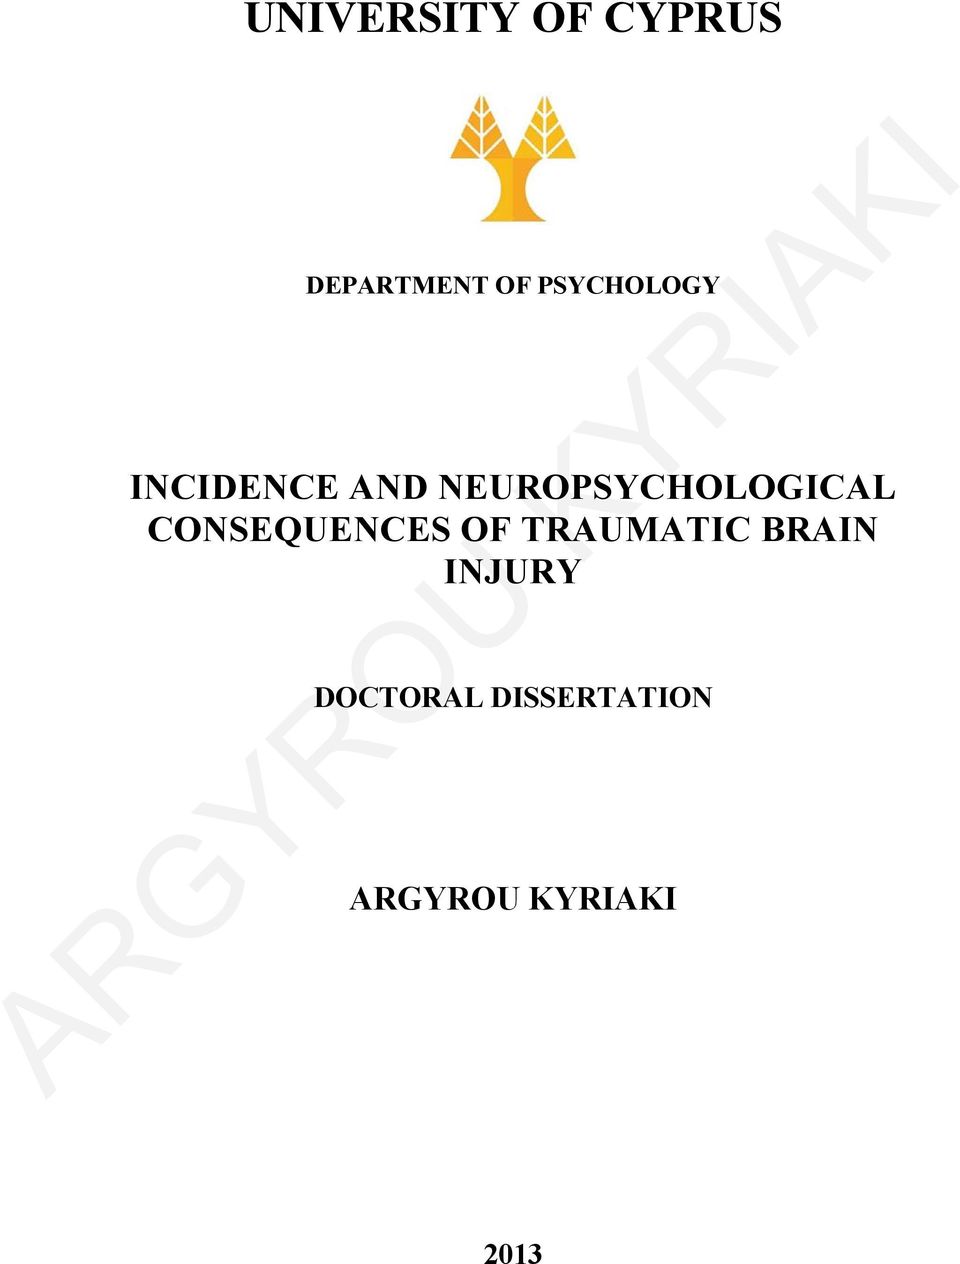 NEUROPSYCHOLOGICAL CONSEQUENCES OF